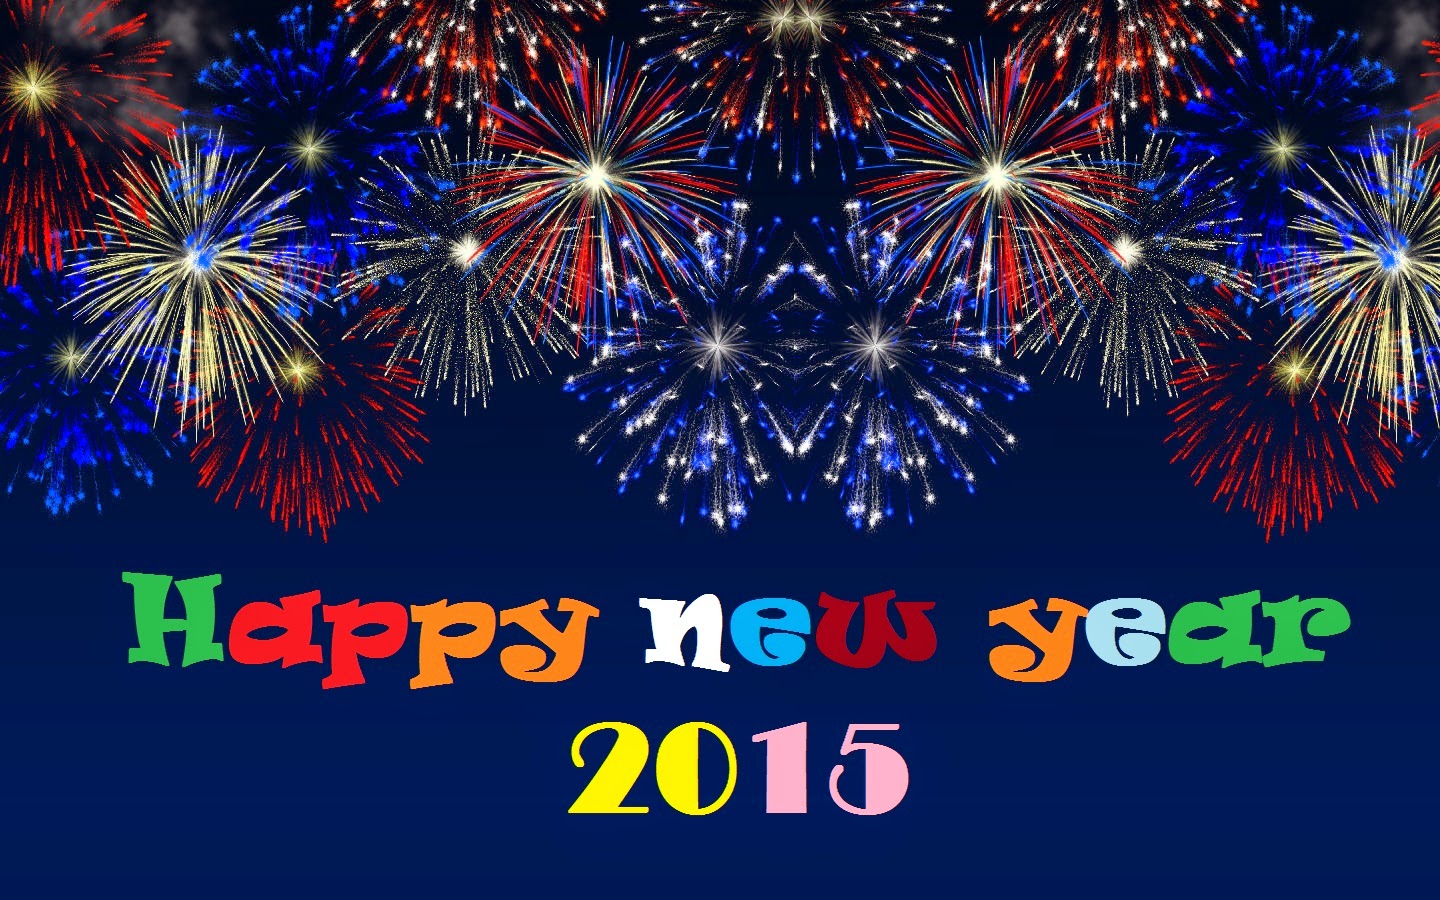 Happy New Year Image HD For Desktop Ongur